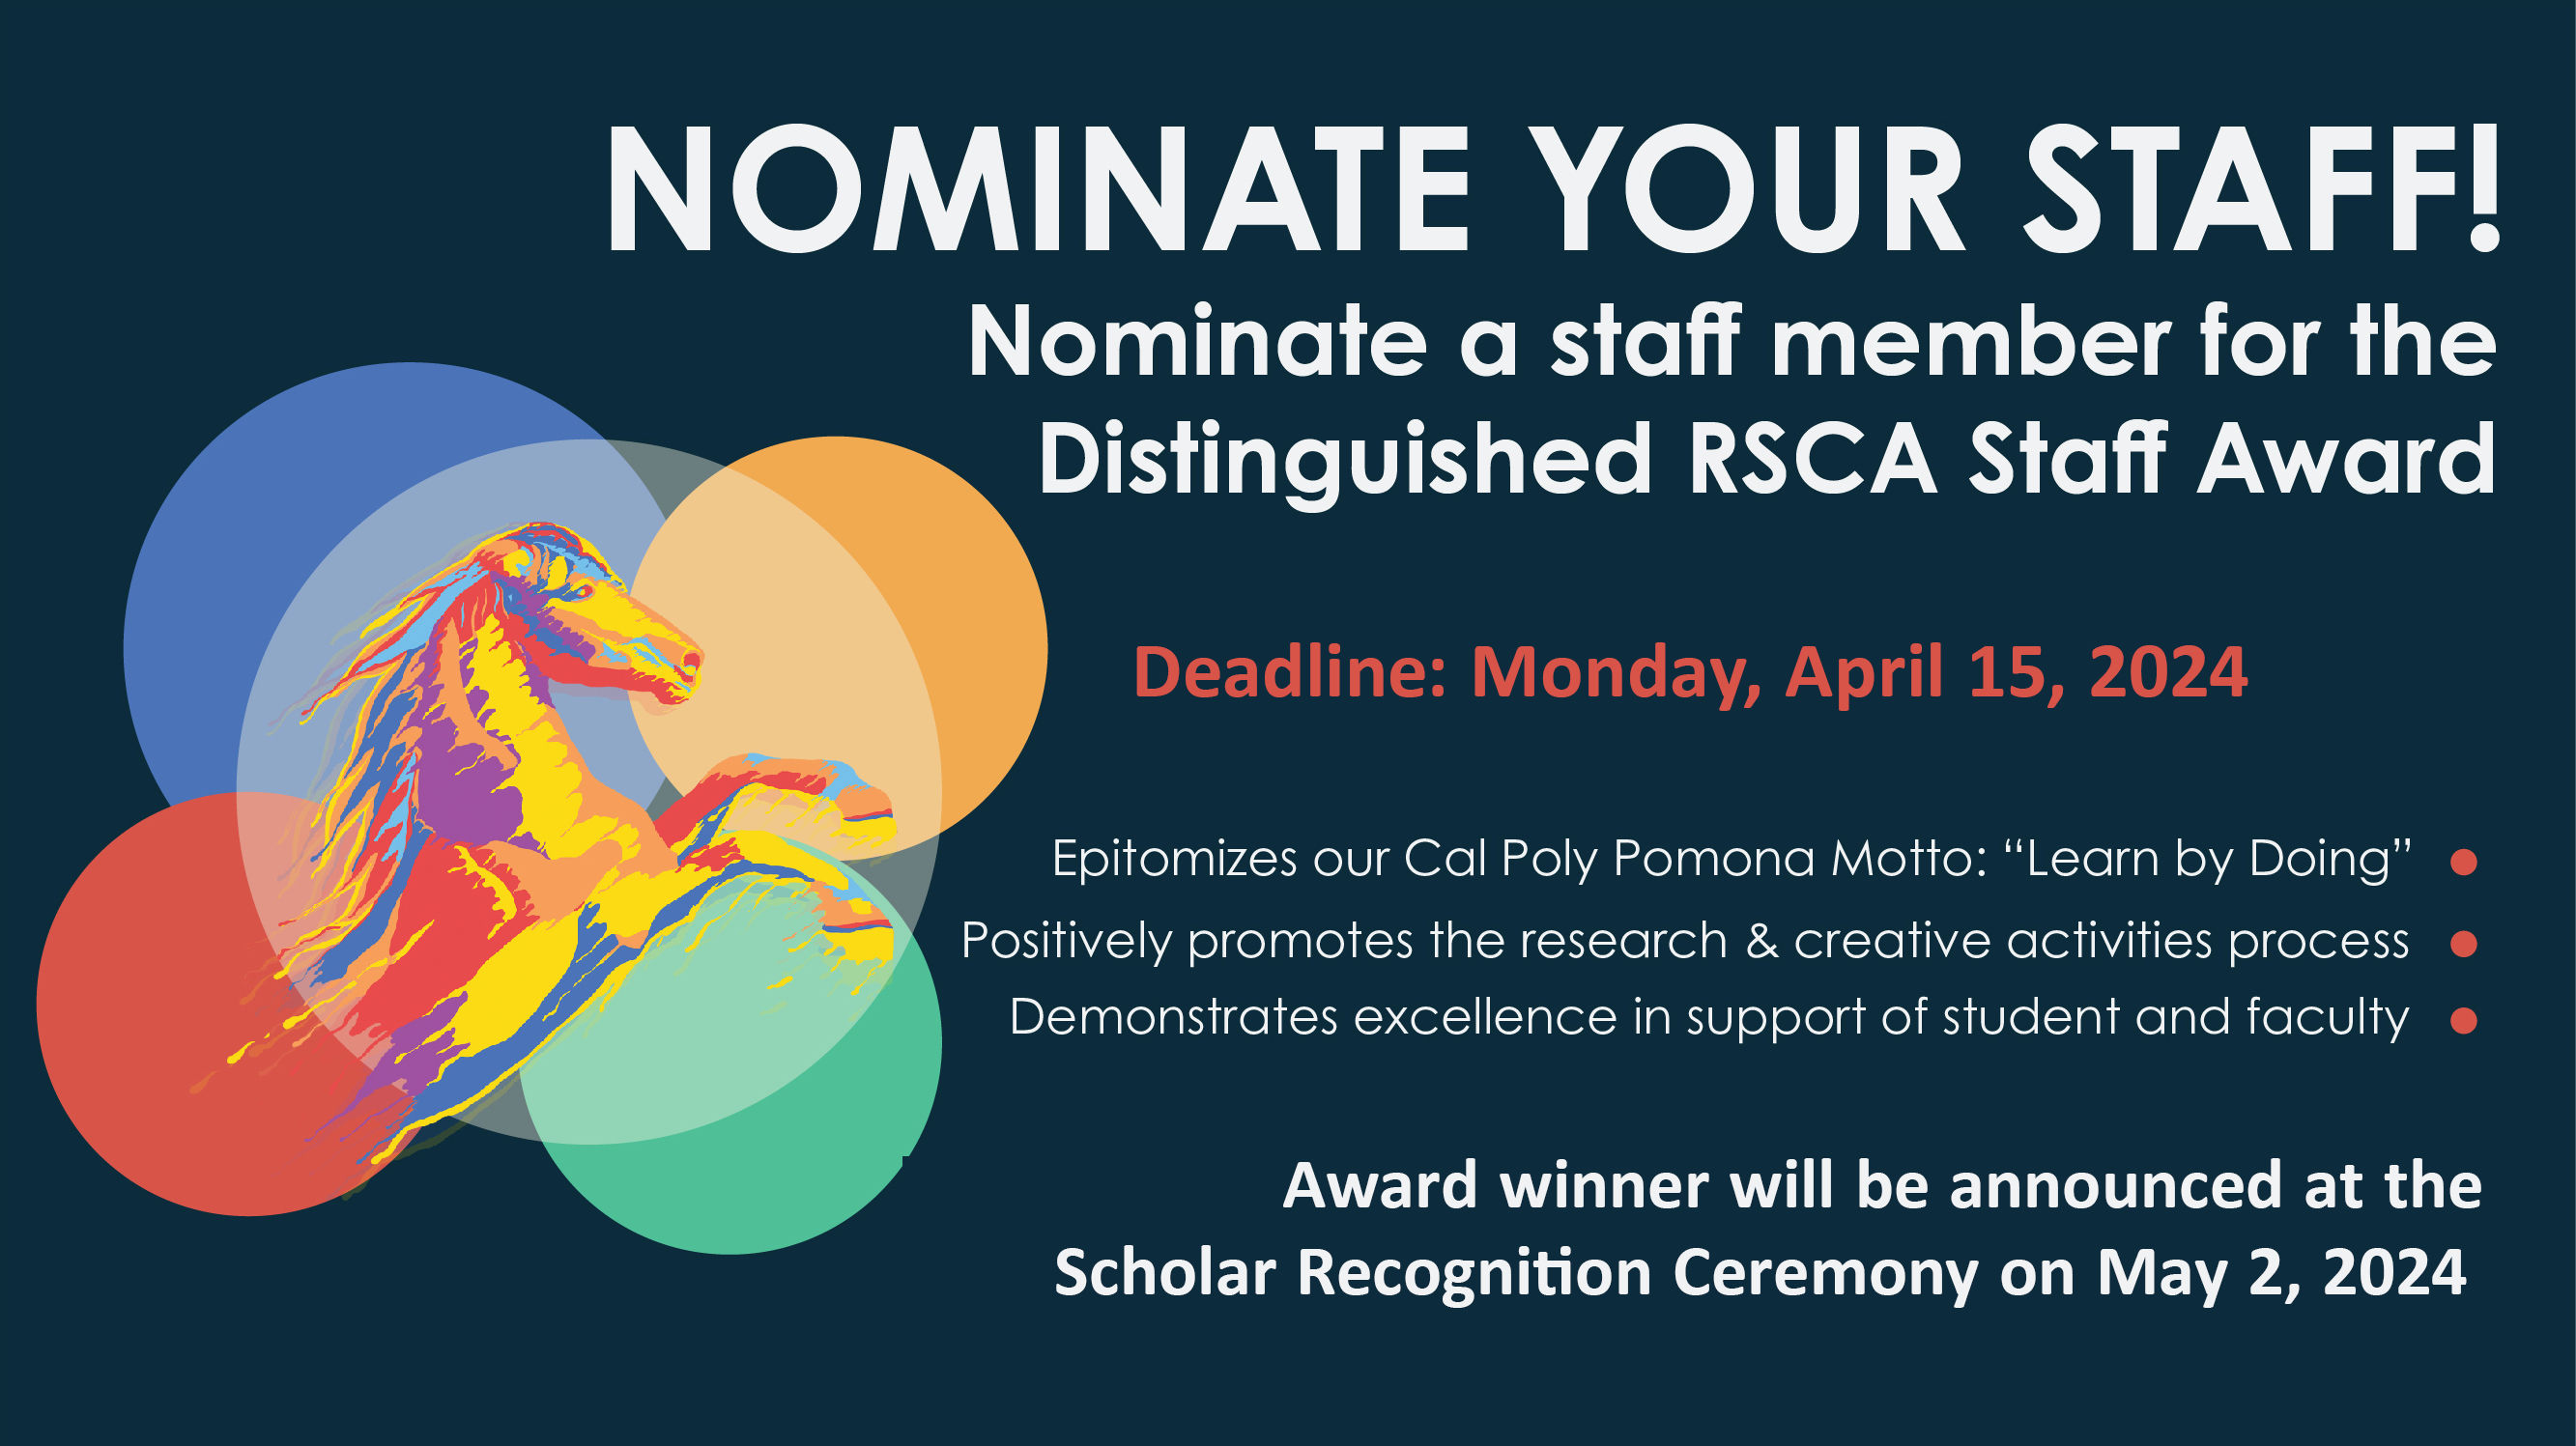 Nominate a staff member for the Distinguished RSCA Staff Award